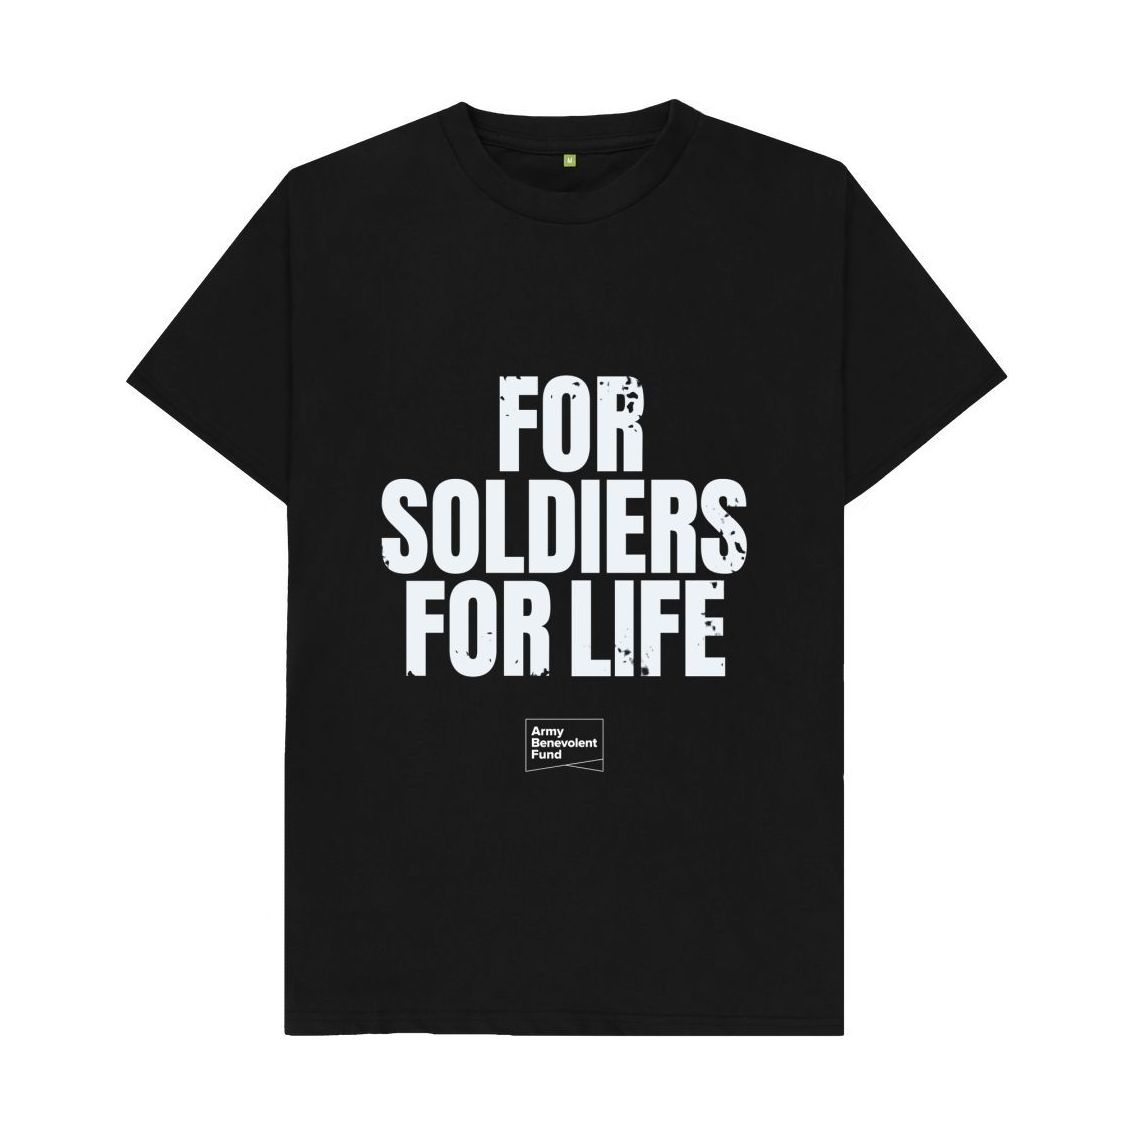 For Soldiers For Life Organic Cotton T-shirt - Army Benevolent Fund